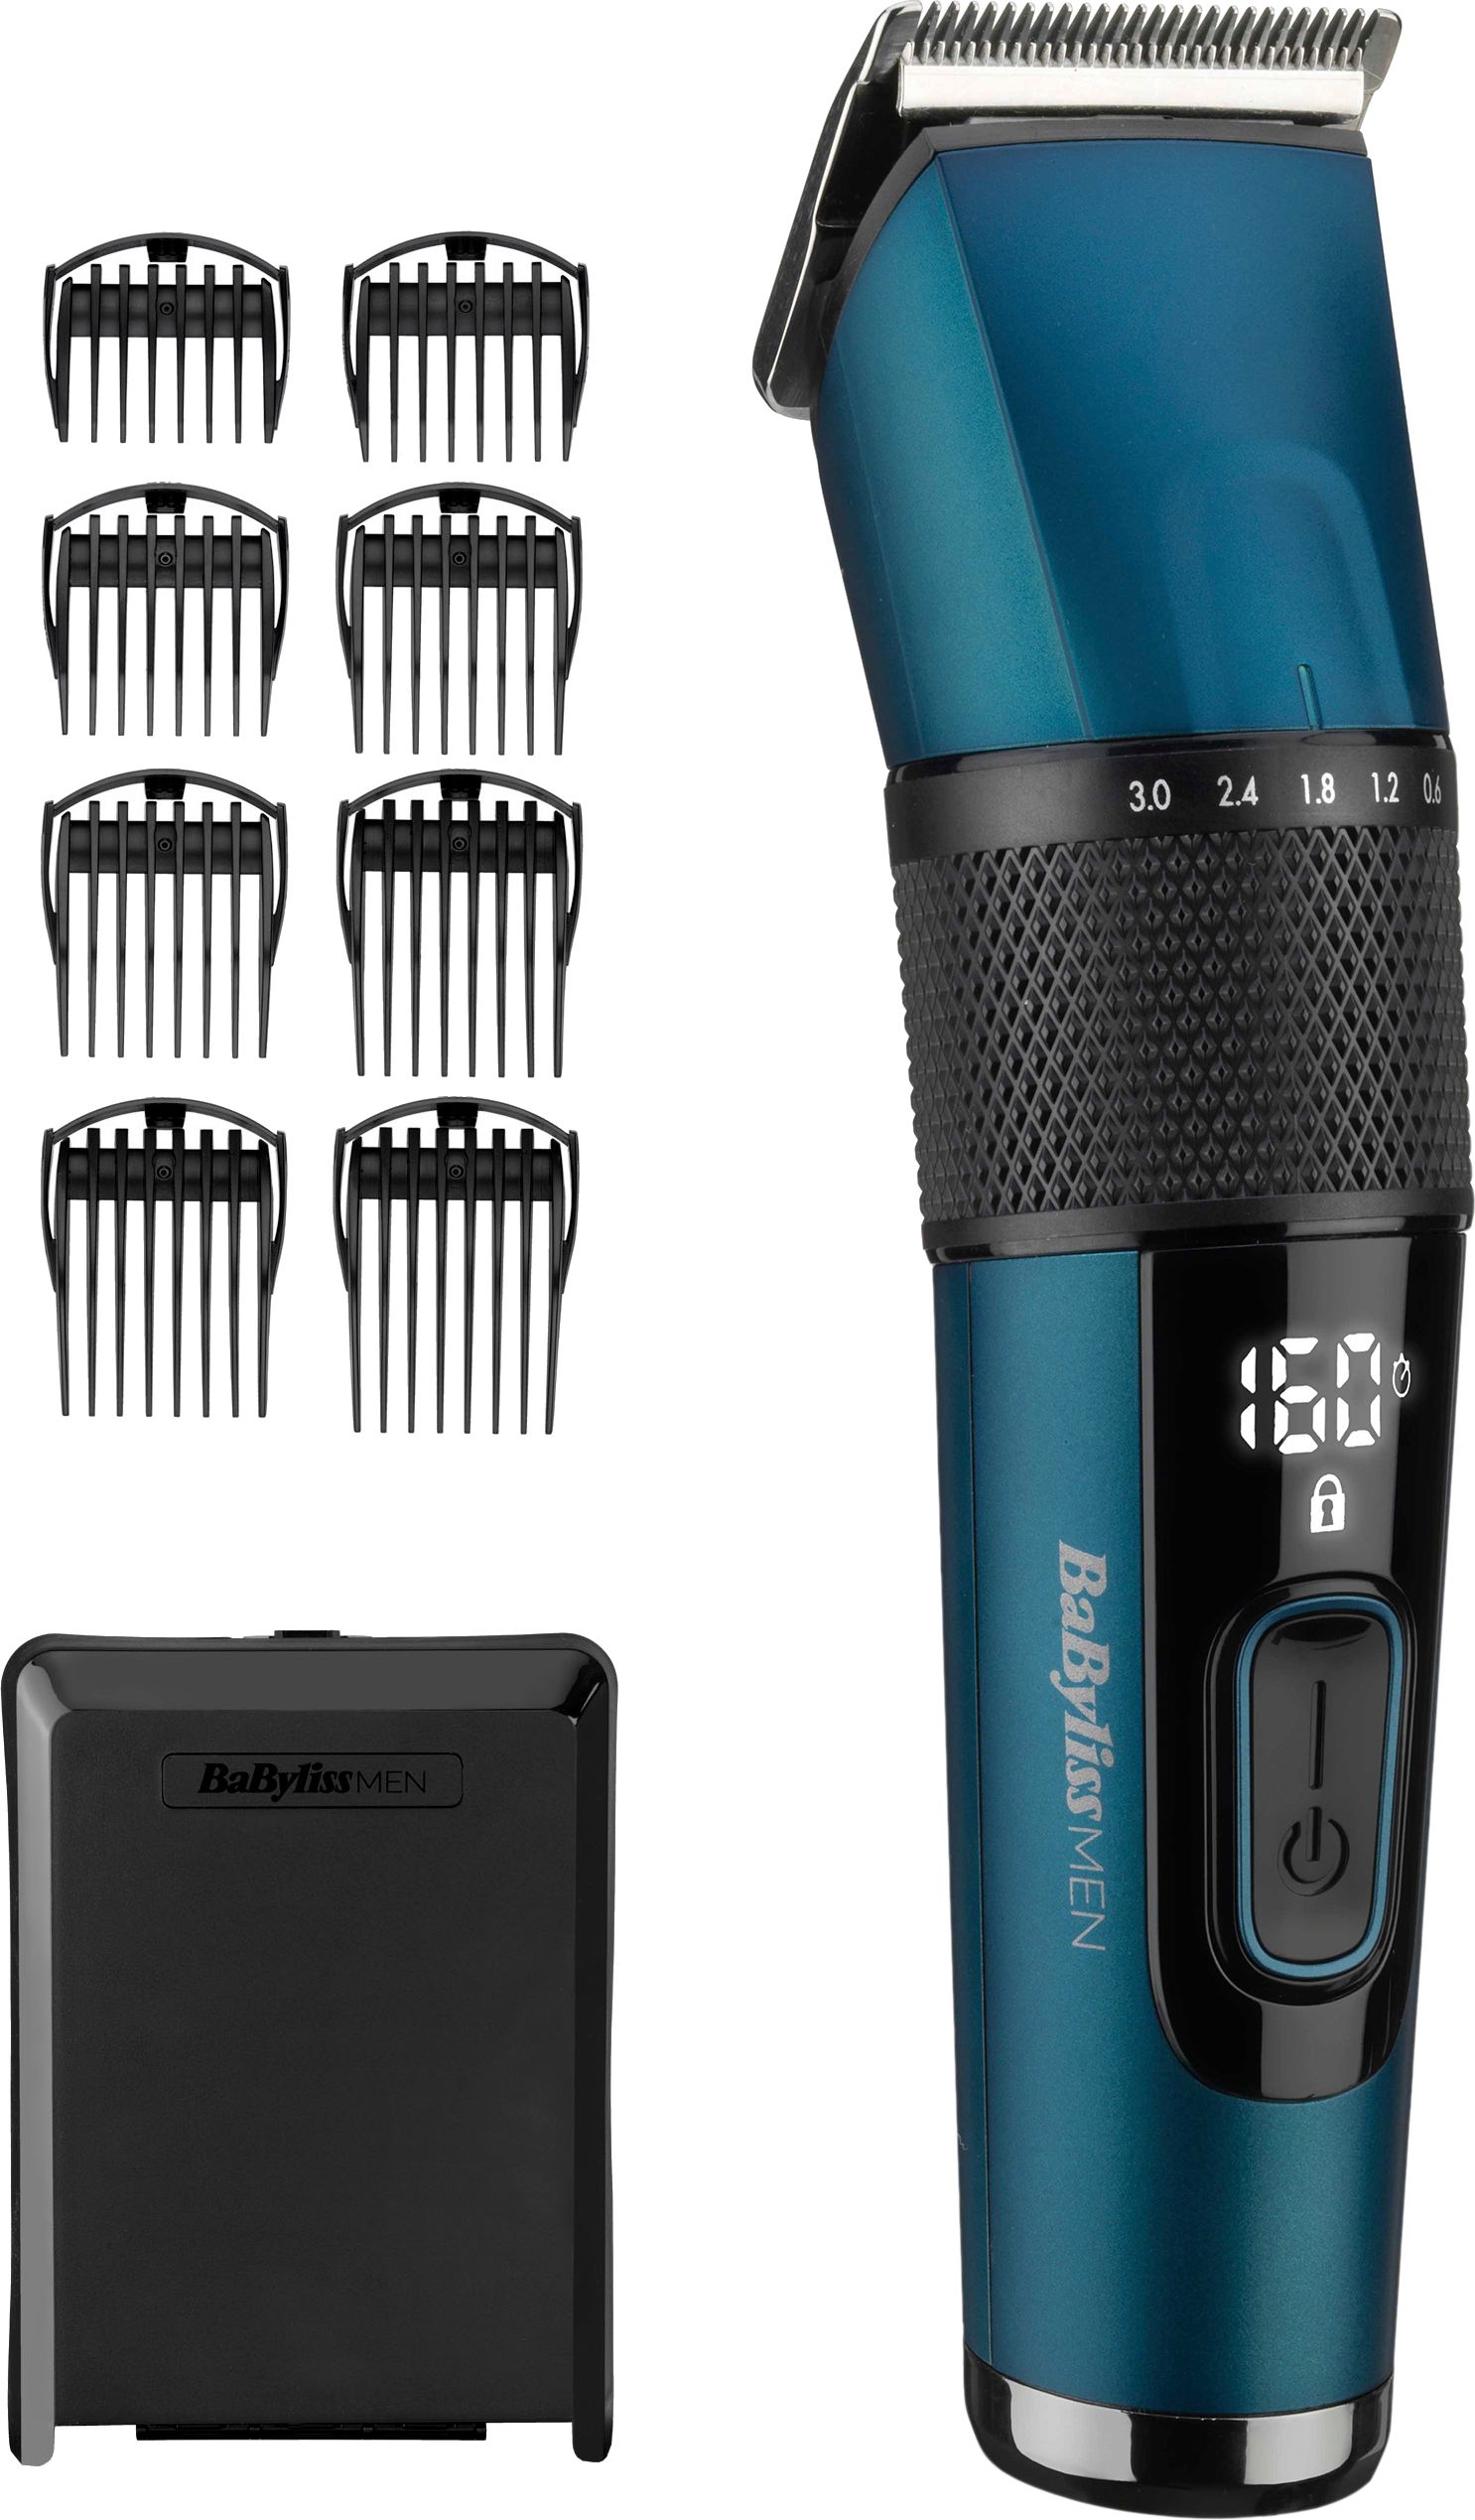 Babyliss Japanese Steel Clipper Hair Clipper Teal, Blue